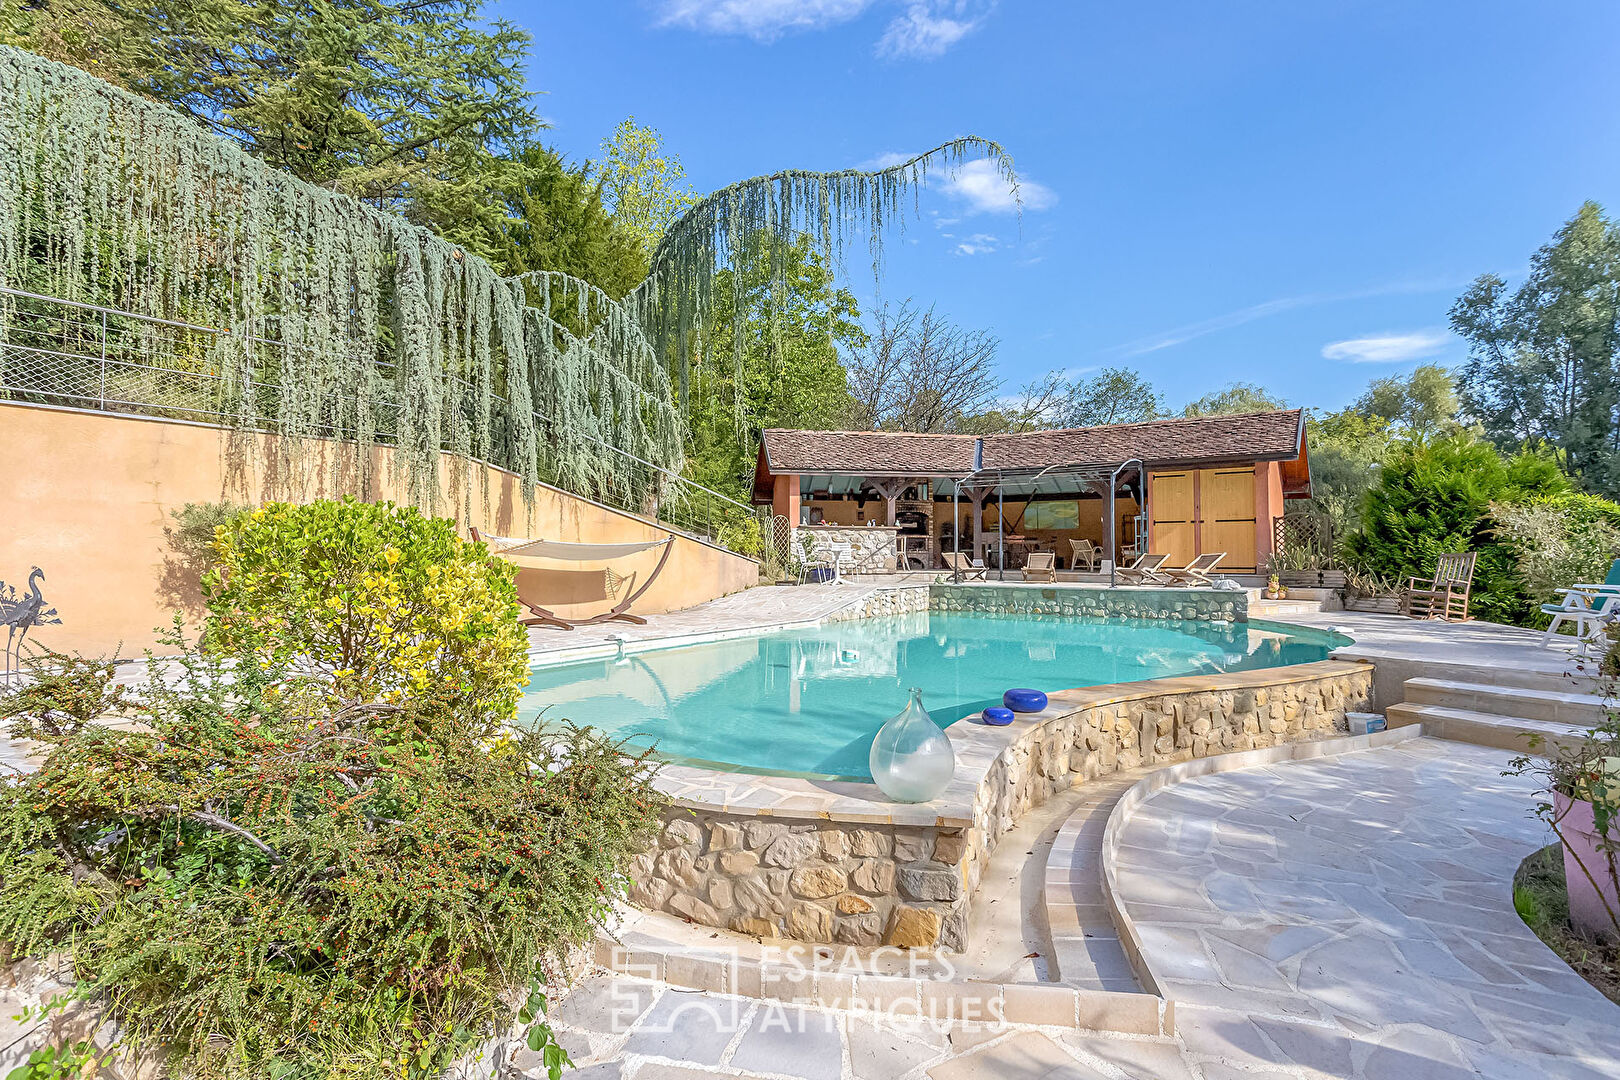 Family property, swimming pool and outbuildings in a green setting